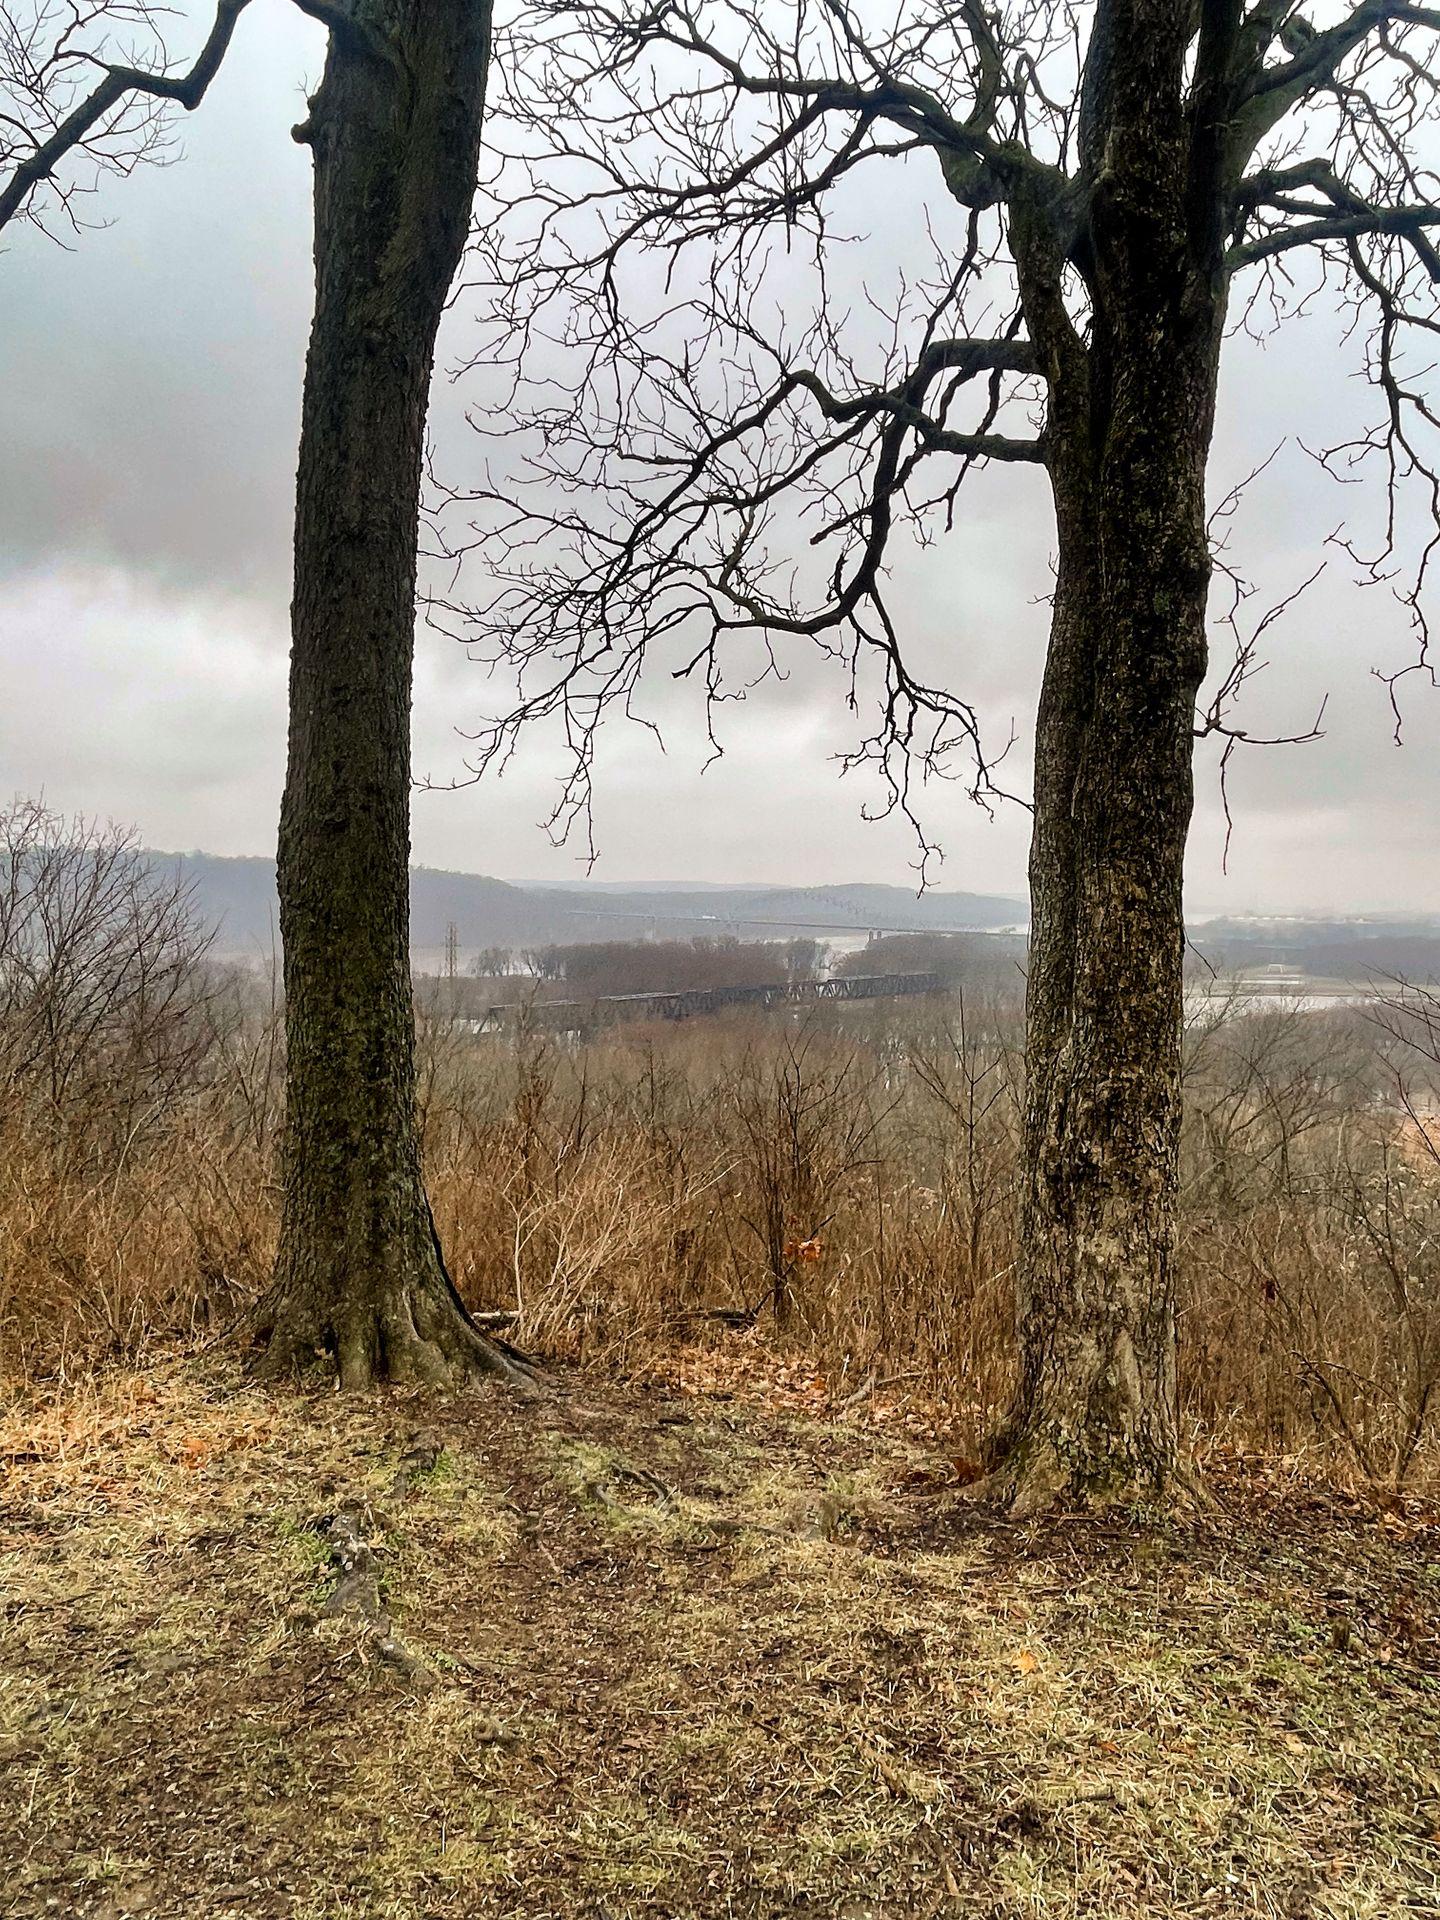 A view of the Ohio River from Shawnee Lookout